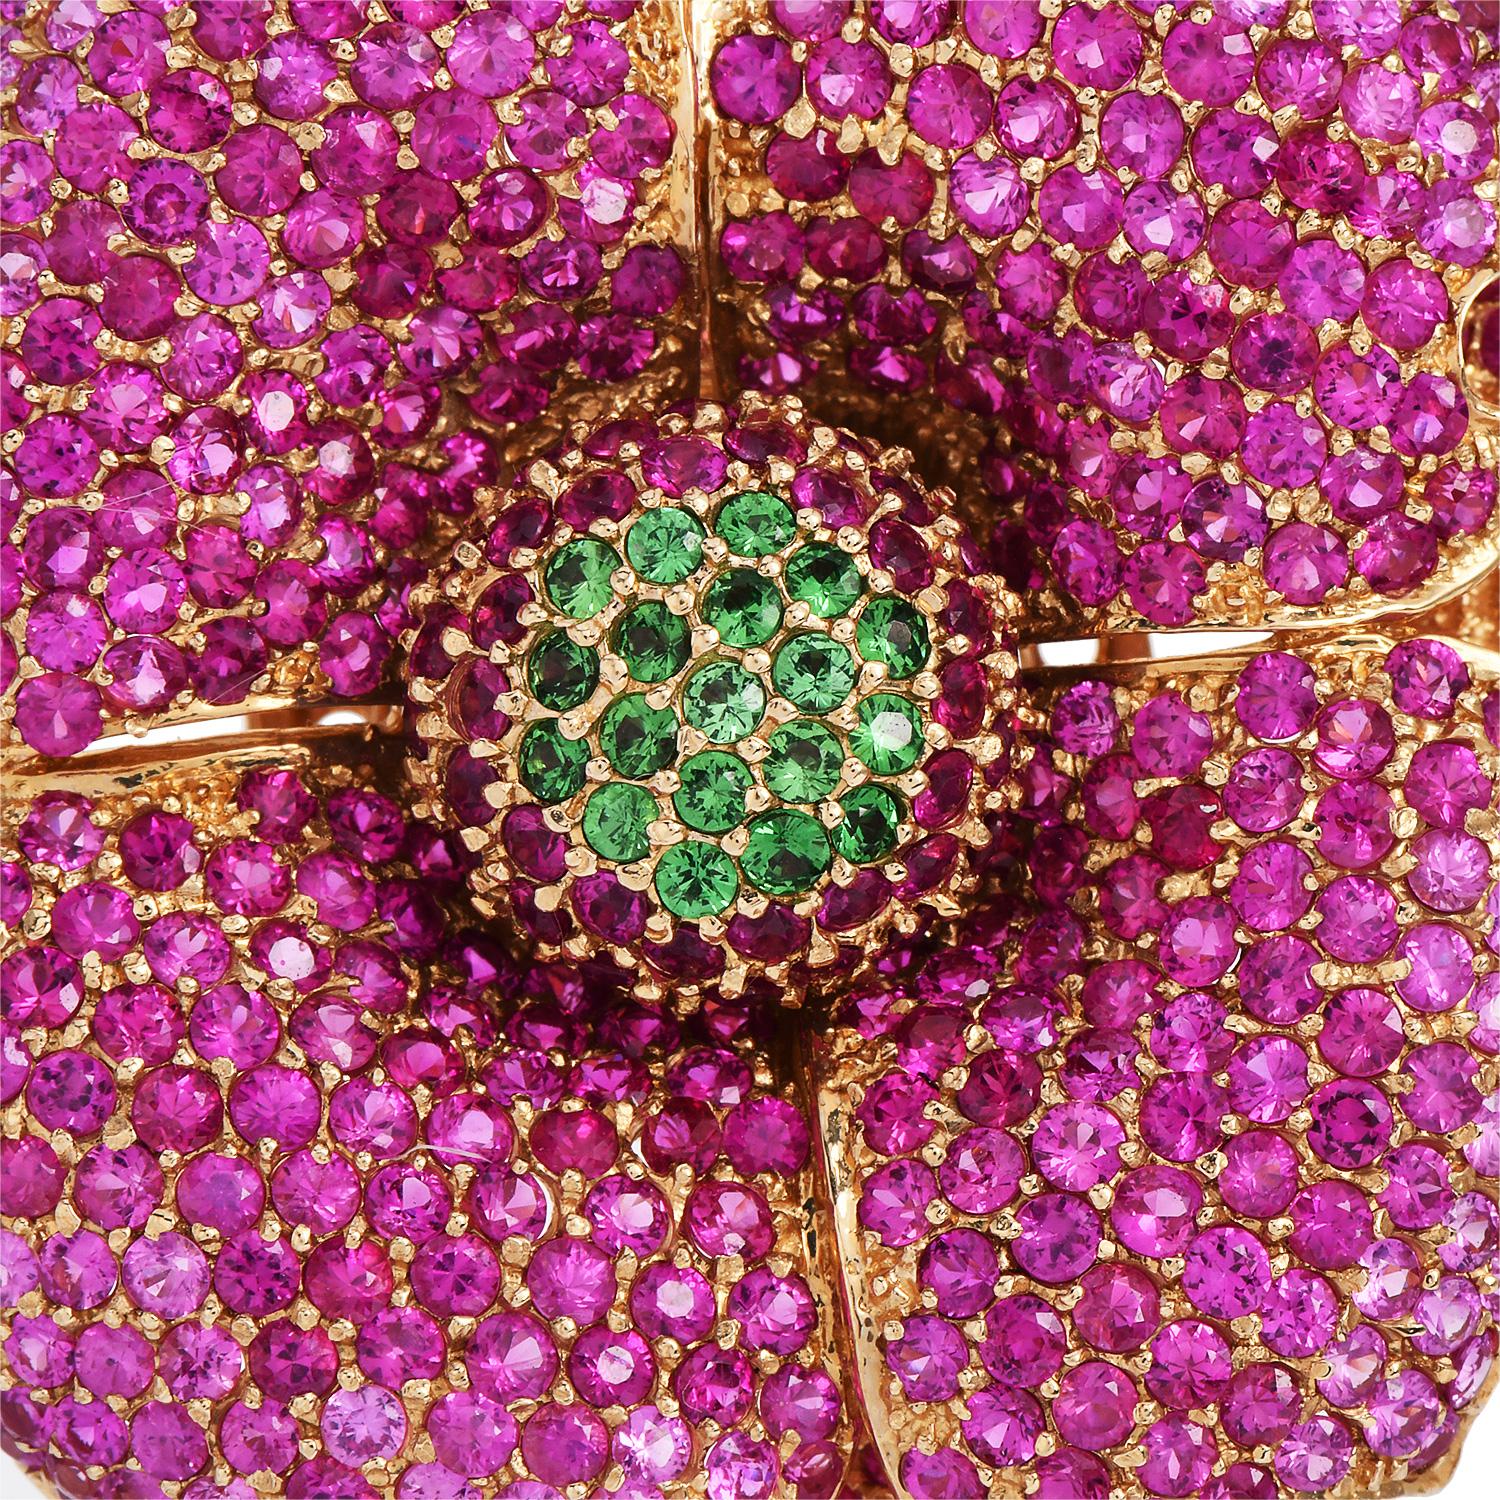 Presenting a Designer statement Brooch Pin by Sonia Bitton hand-crafted in 14K yellow gold with genuine pink sapphires and Tsavorite gemstones.

The three-layer flower motif brooch is decorated with precious natural round Pave Pink Sapphires and